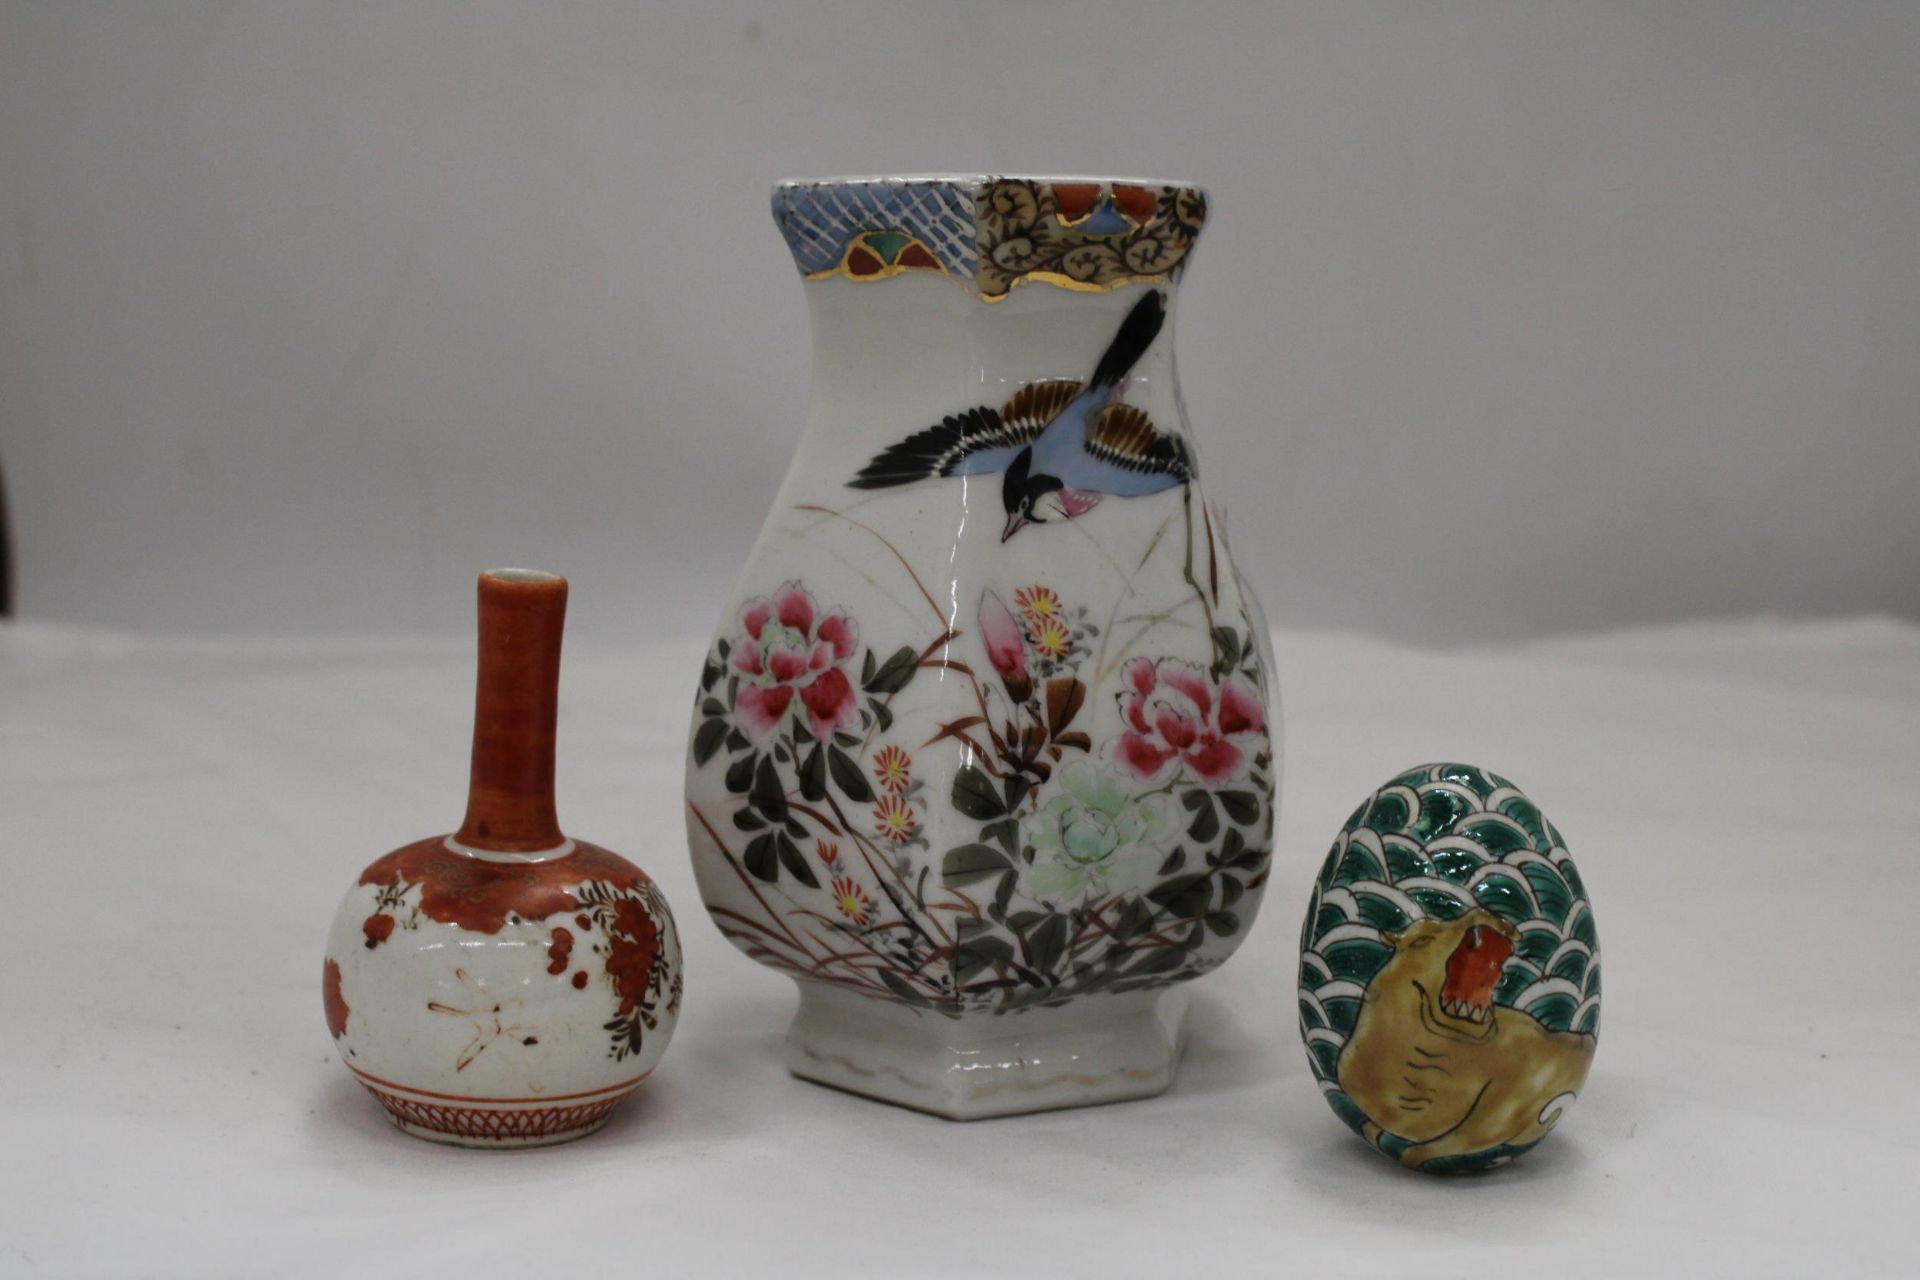 AN ORIENTAL HEXAGONAL VASE, SMALLER ORIENTAL VASE AND DECORATED EGG - Image 3 of 6